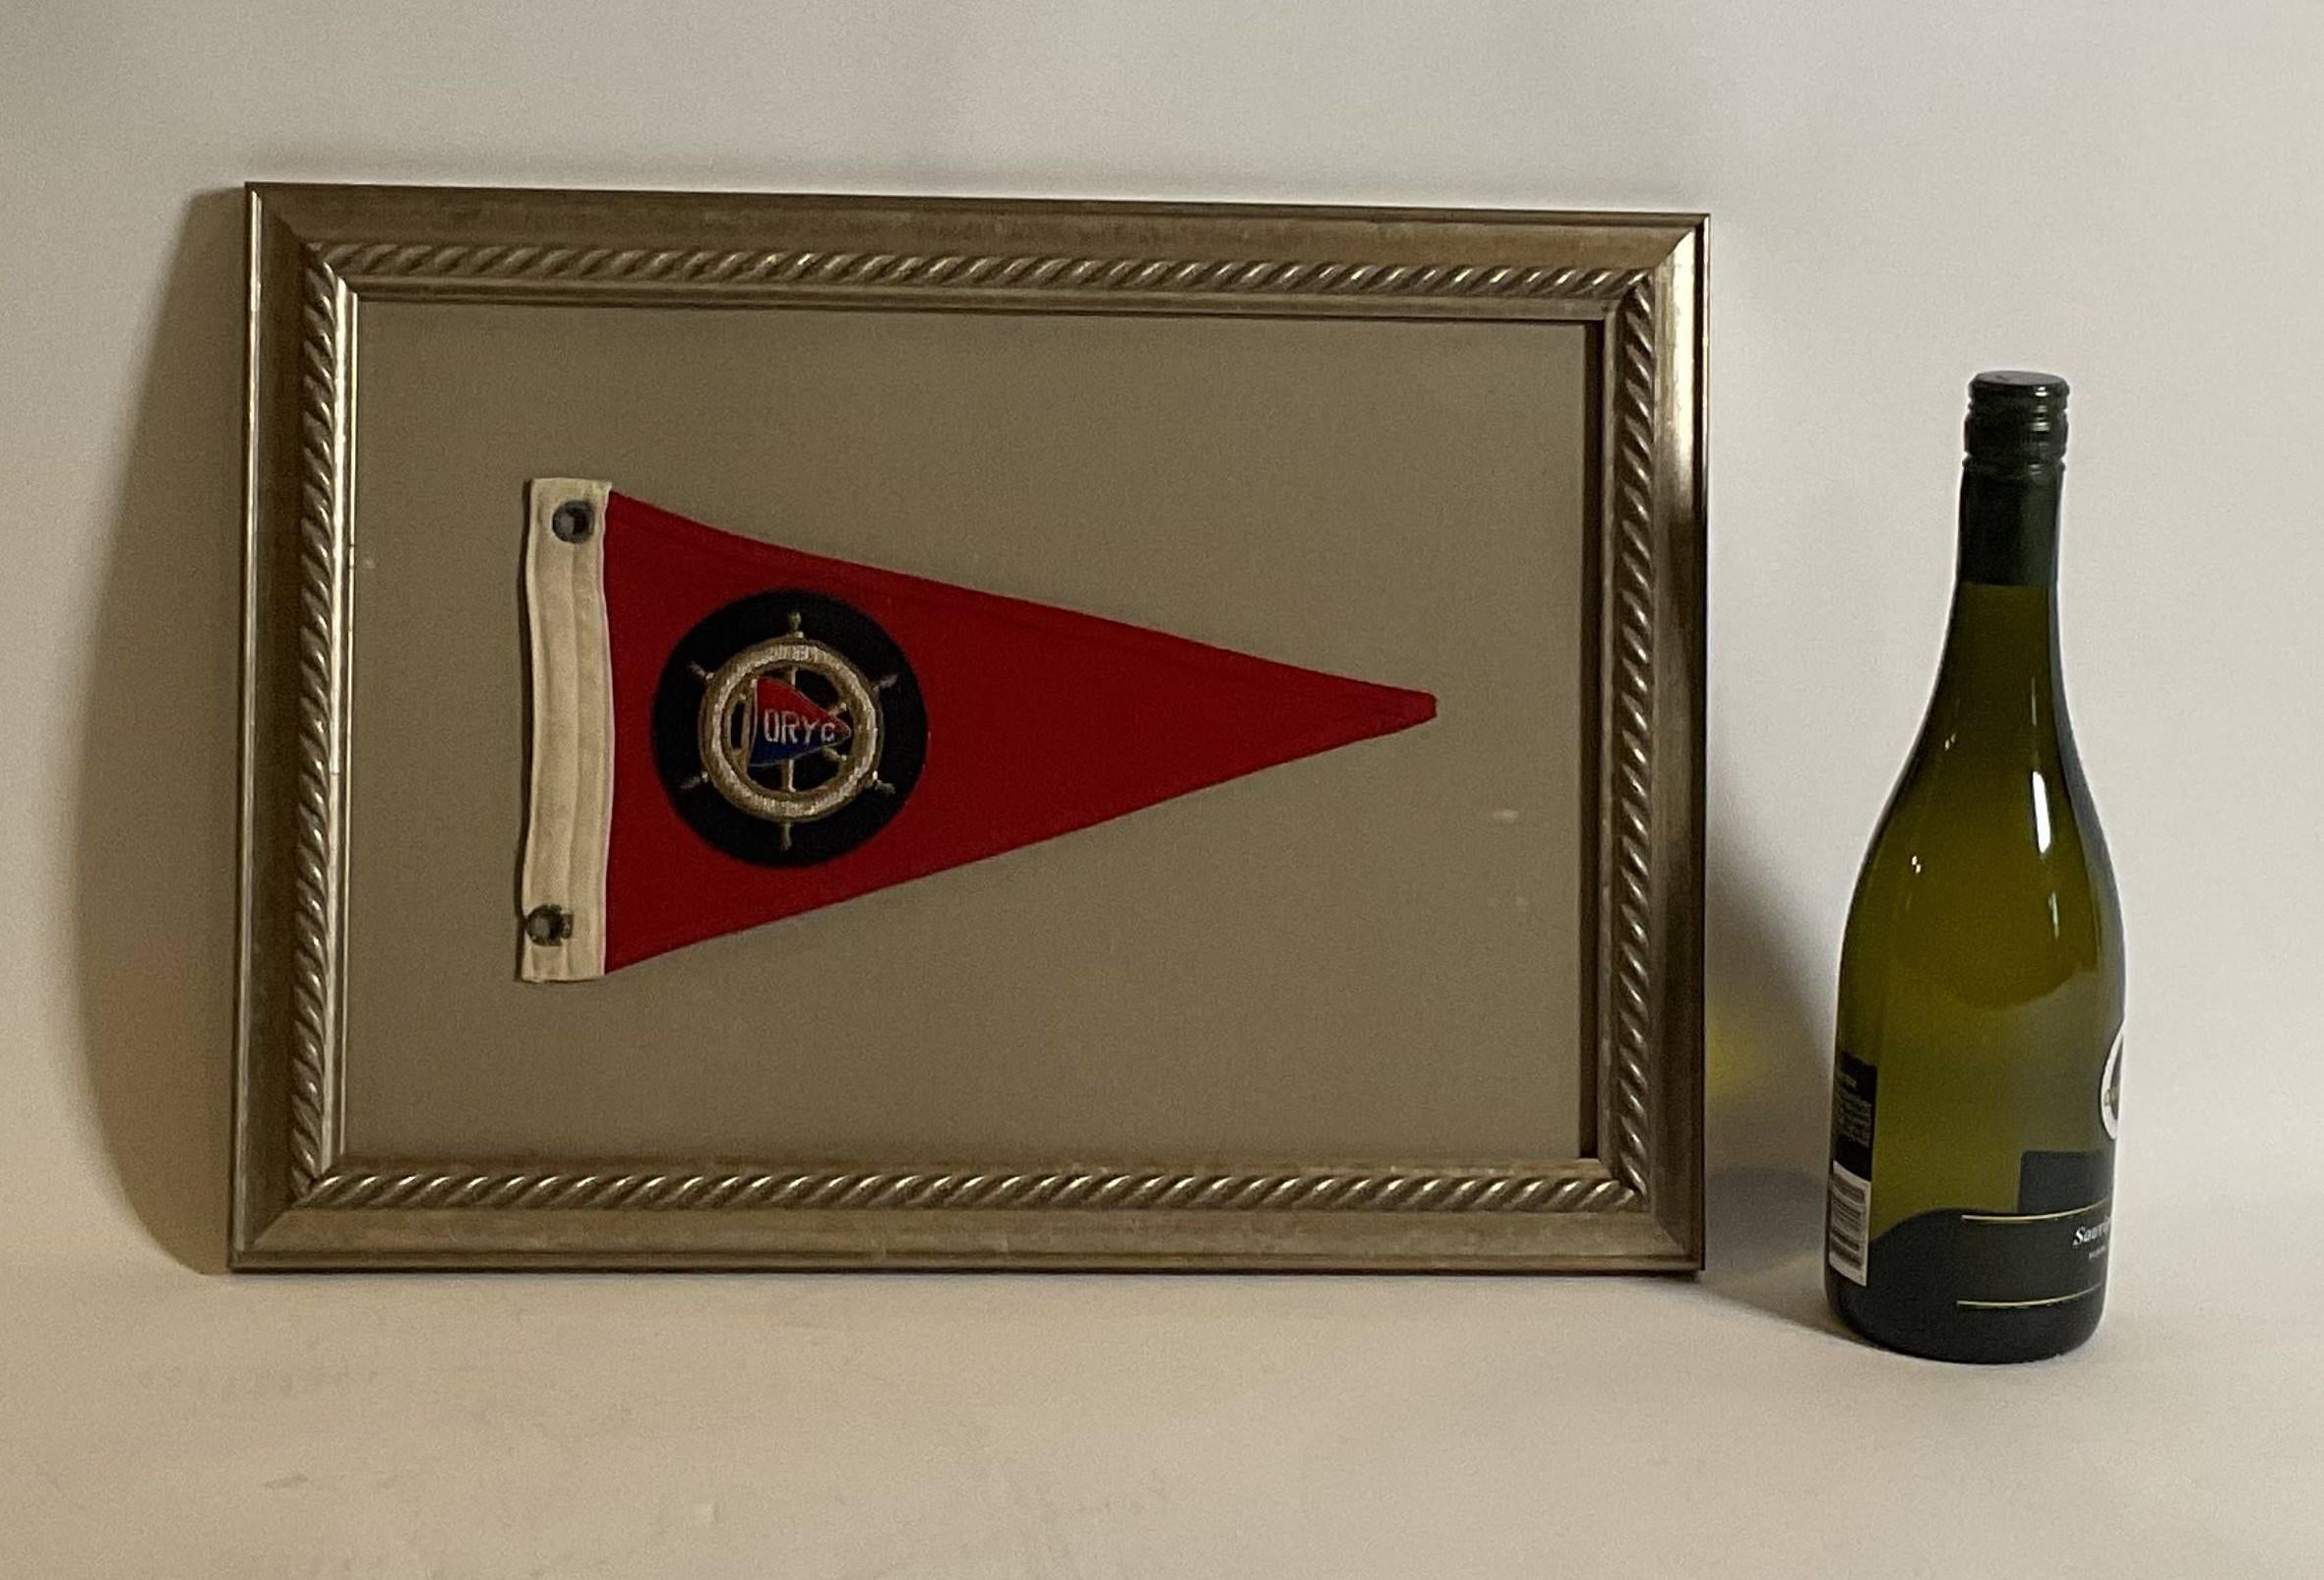 Framed nautical flag with an embroidered flag from the Ottawa River Yacht Club, The burgee flag is fitted inside a ships wheel. Nicely framed 

Weight: 3 lbs.
Overall Dimensions: 13